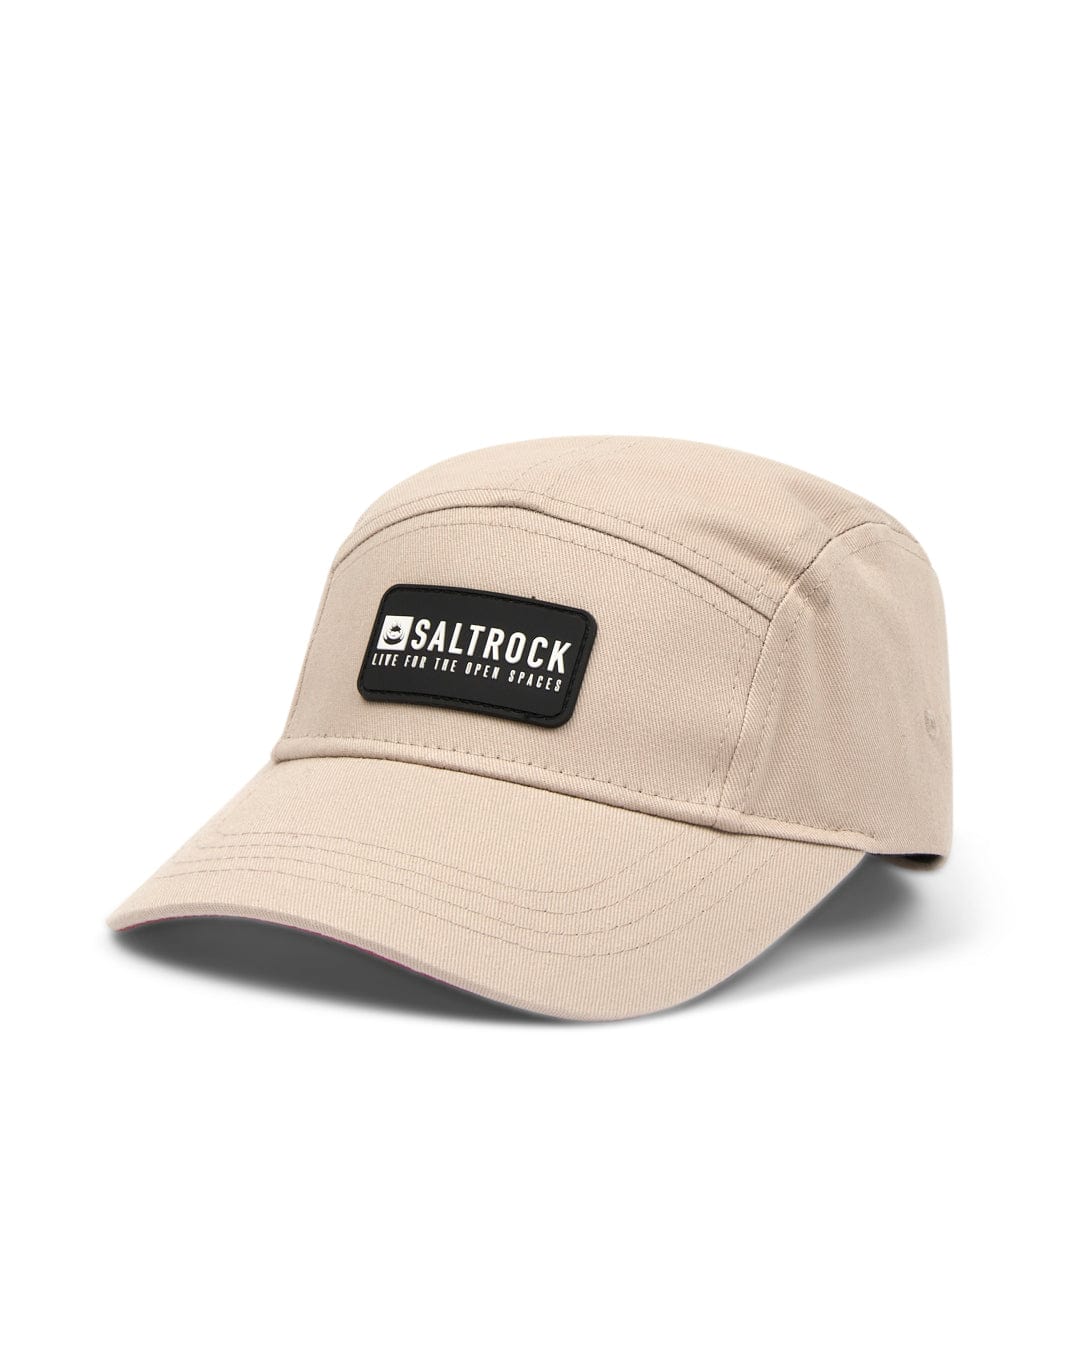 Cream cotton baseball cap with Saltrock logo on white background, featuring an adjustable strap.